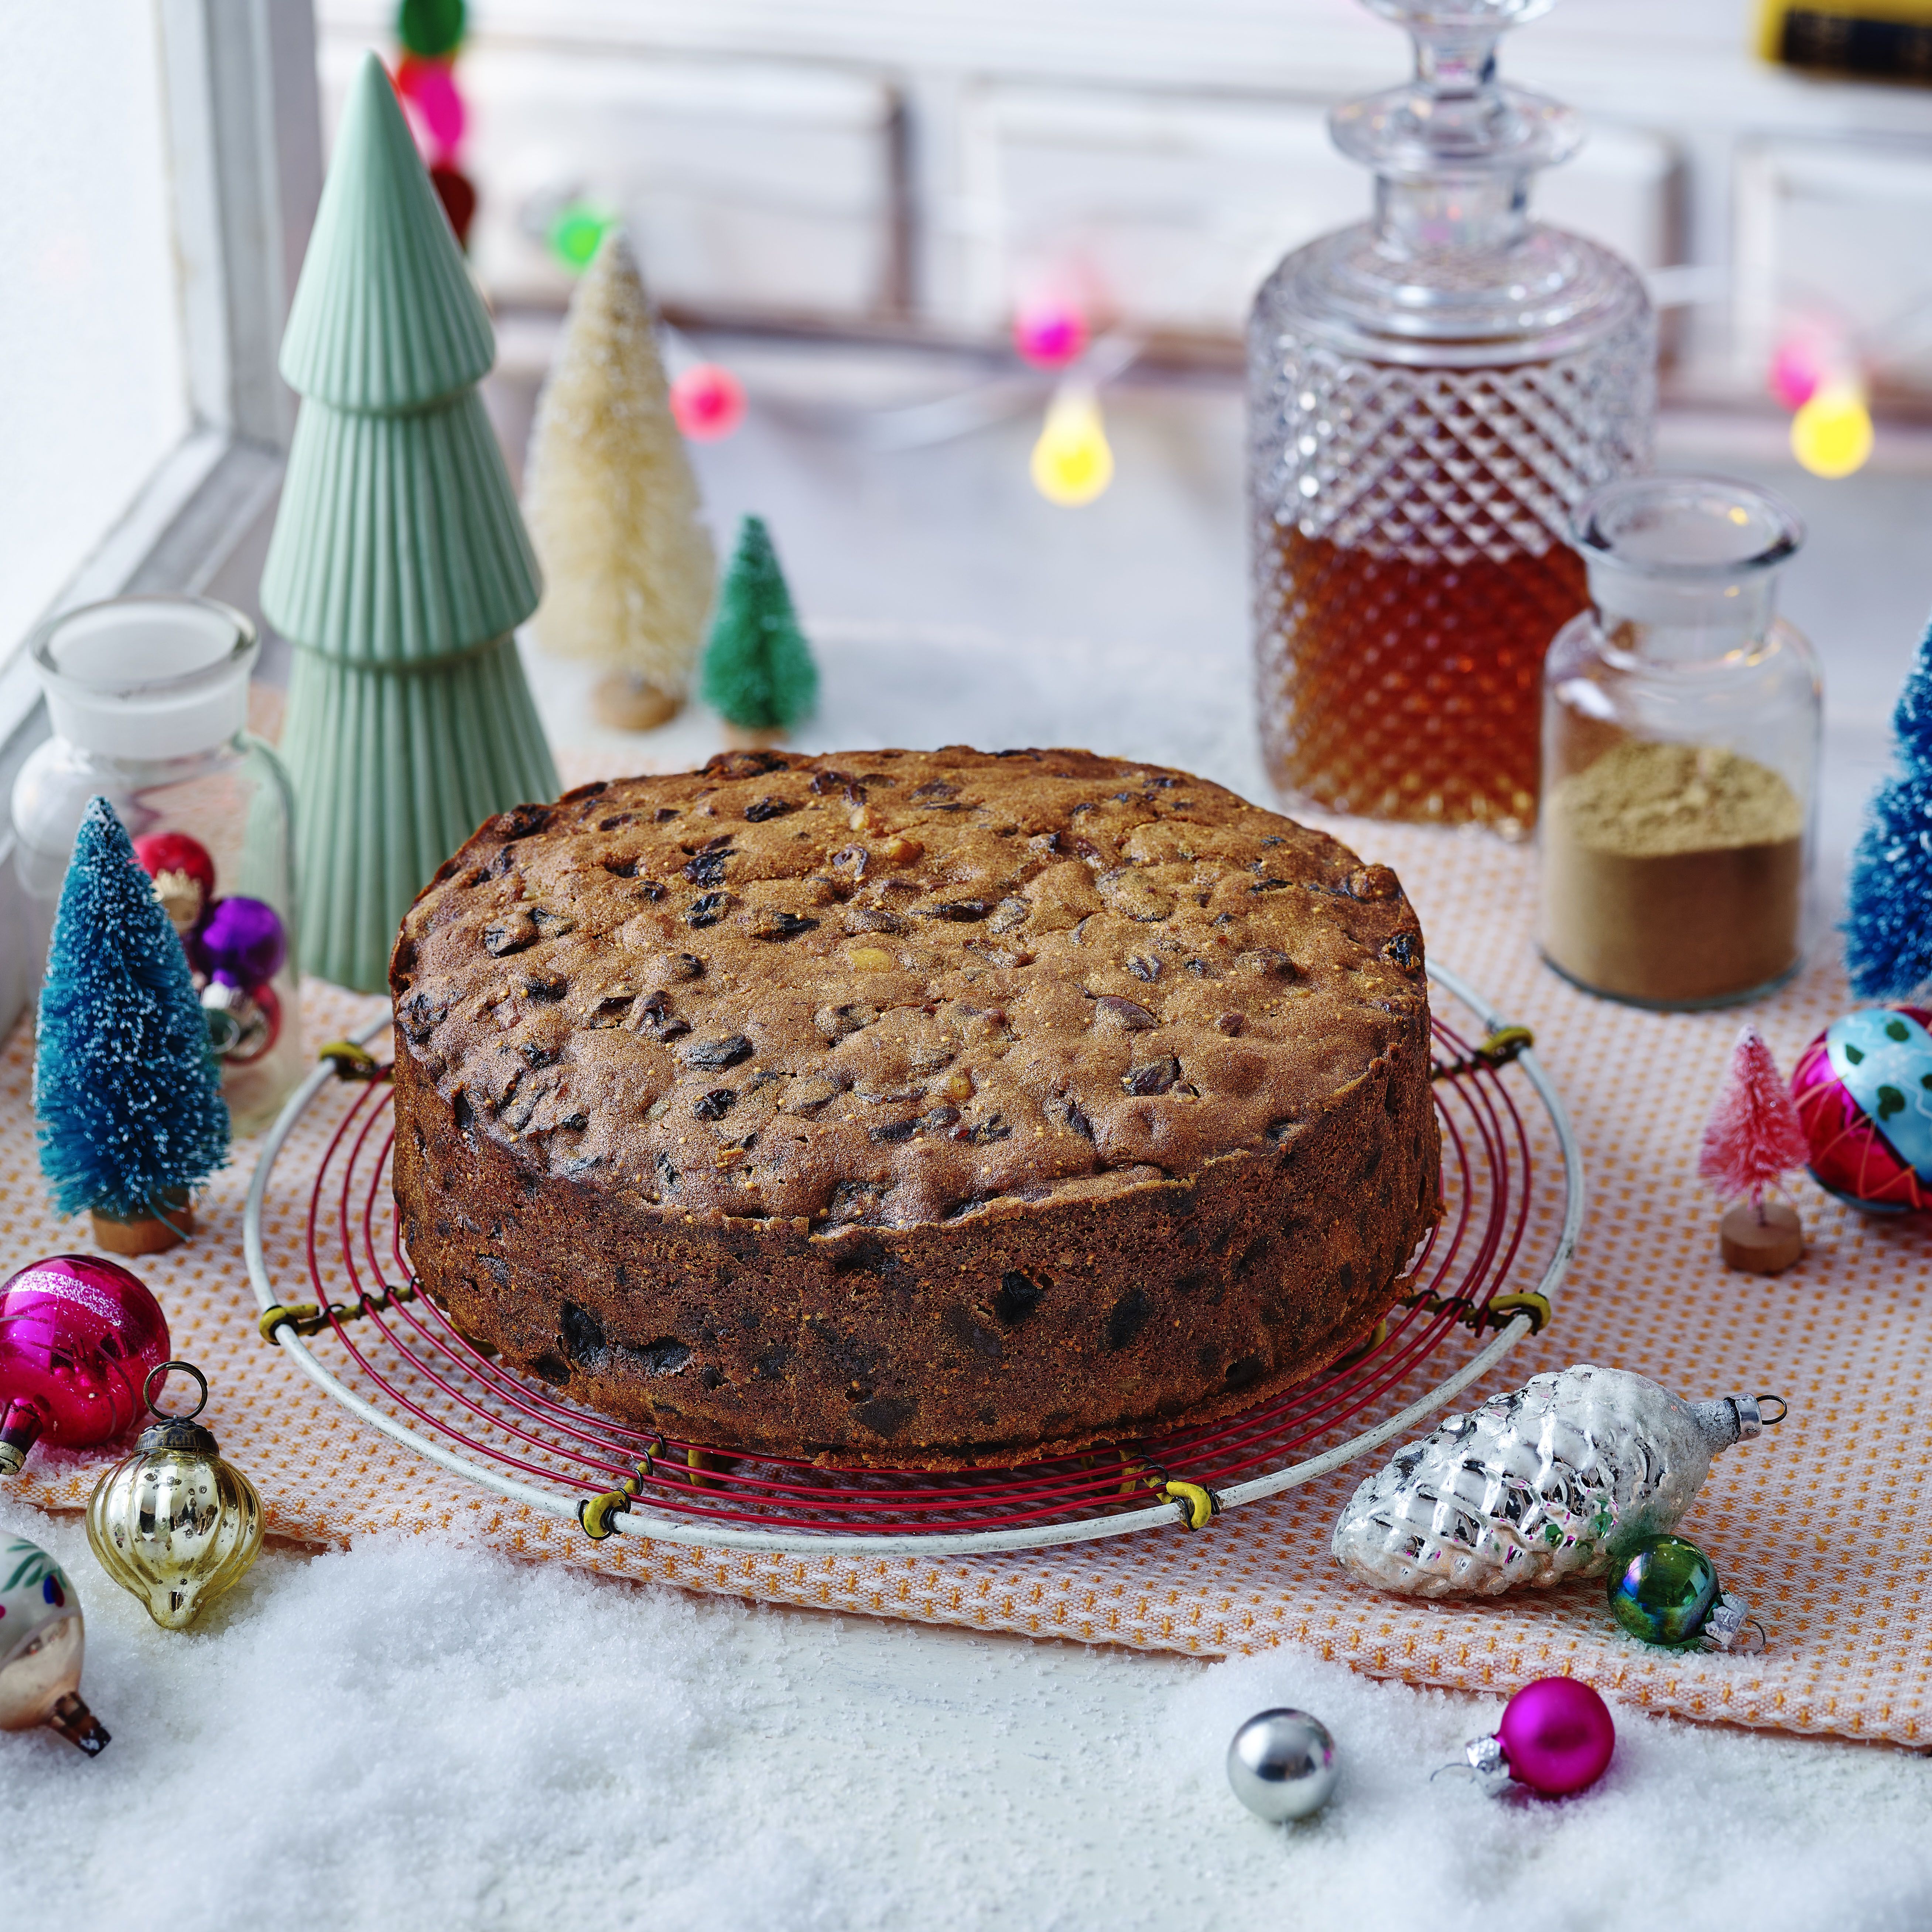 60 Best Christmas Cake Ideas for 2022 - Easy Holiday Cake Recipes